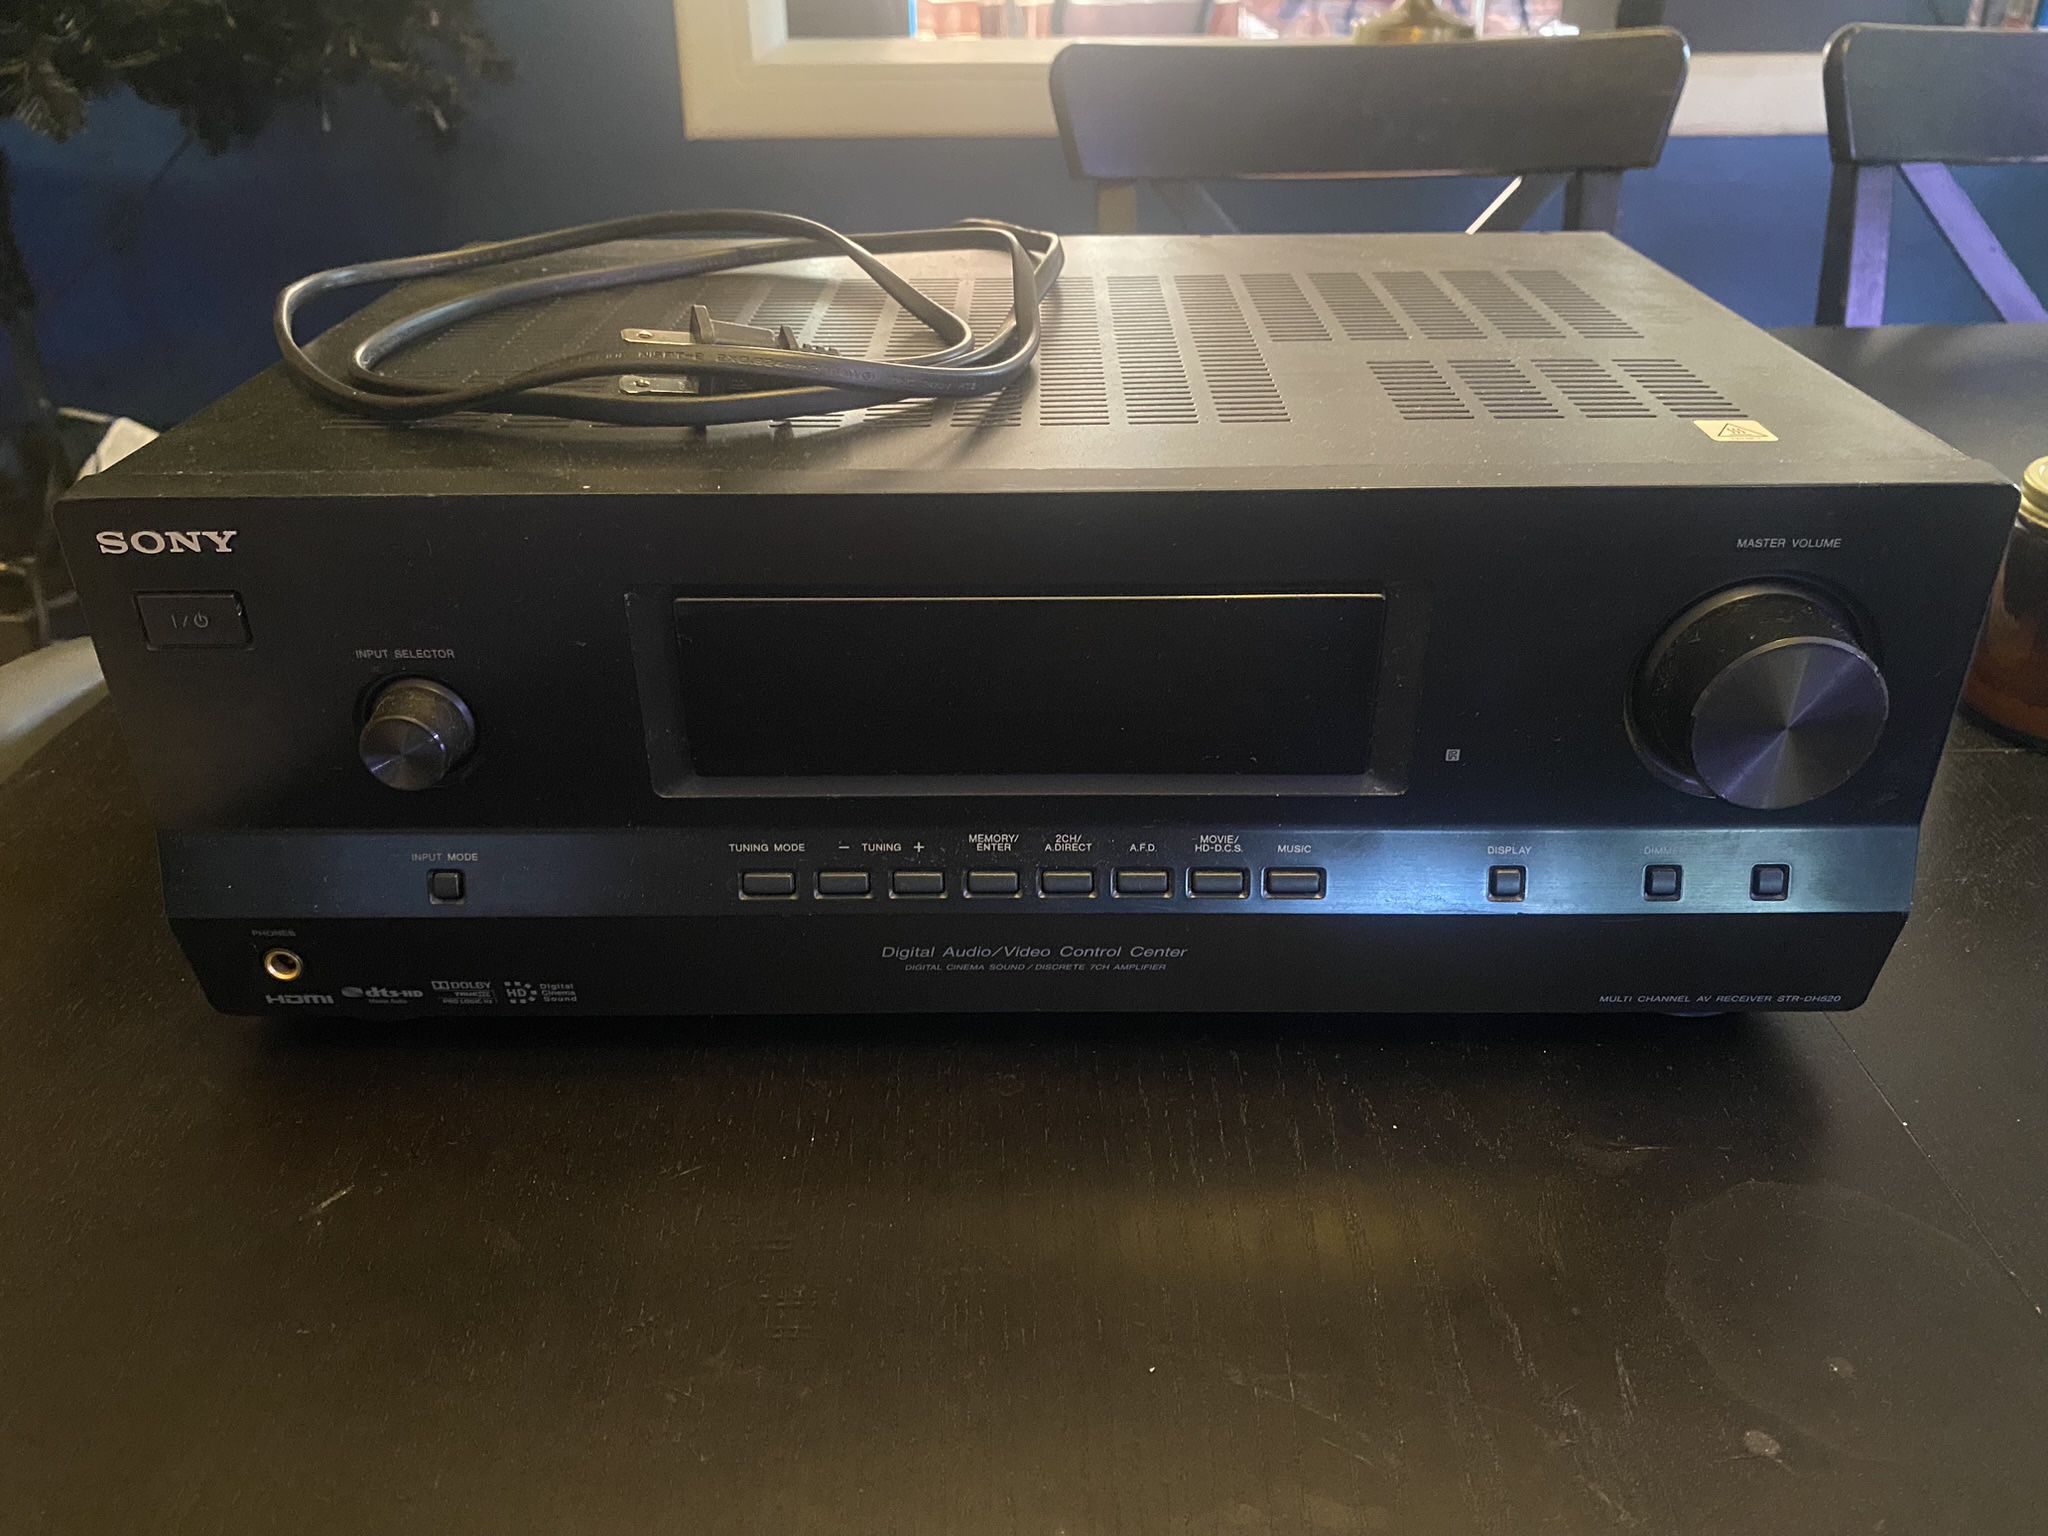 Sony Digital Audio/Video Receiver with Sony Subwoofer and Bose Speakers